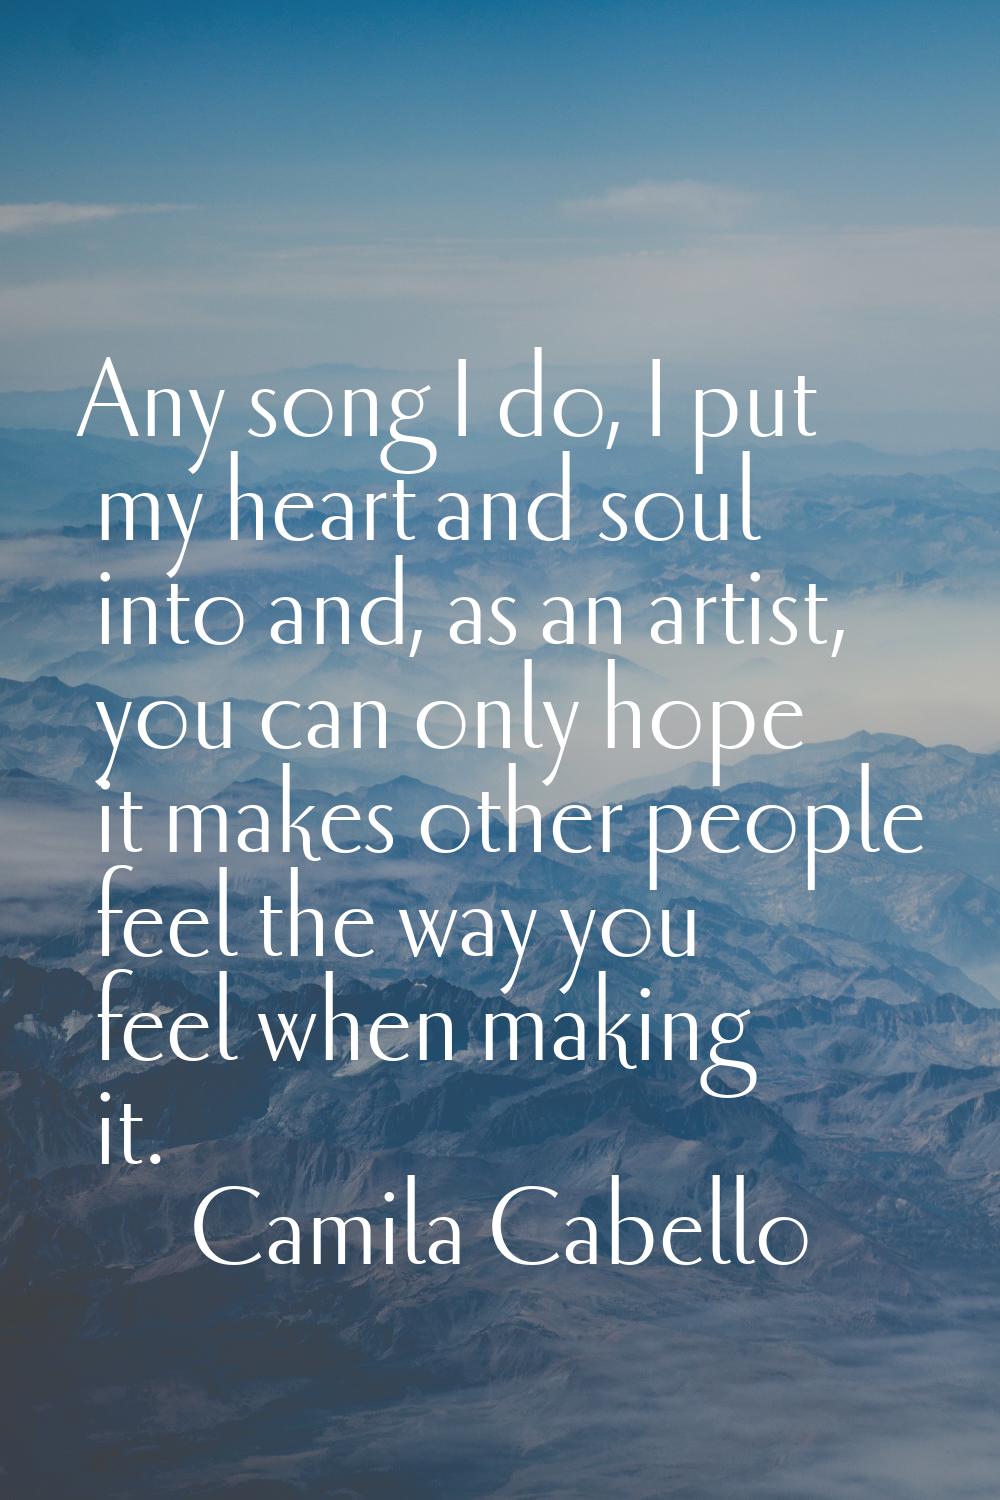 Any song I do, I put my heart and soul into and, as an artist, you can only hope it makes other peo